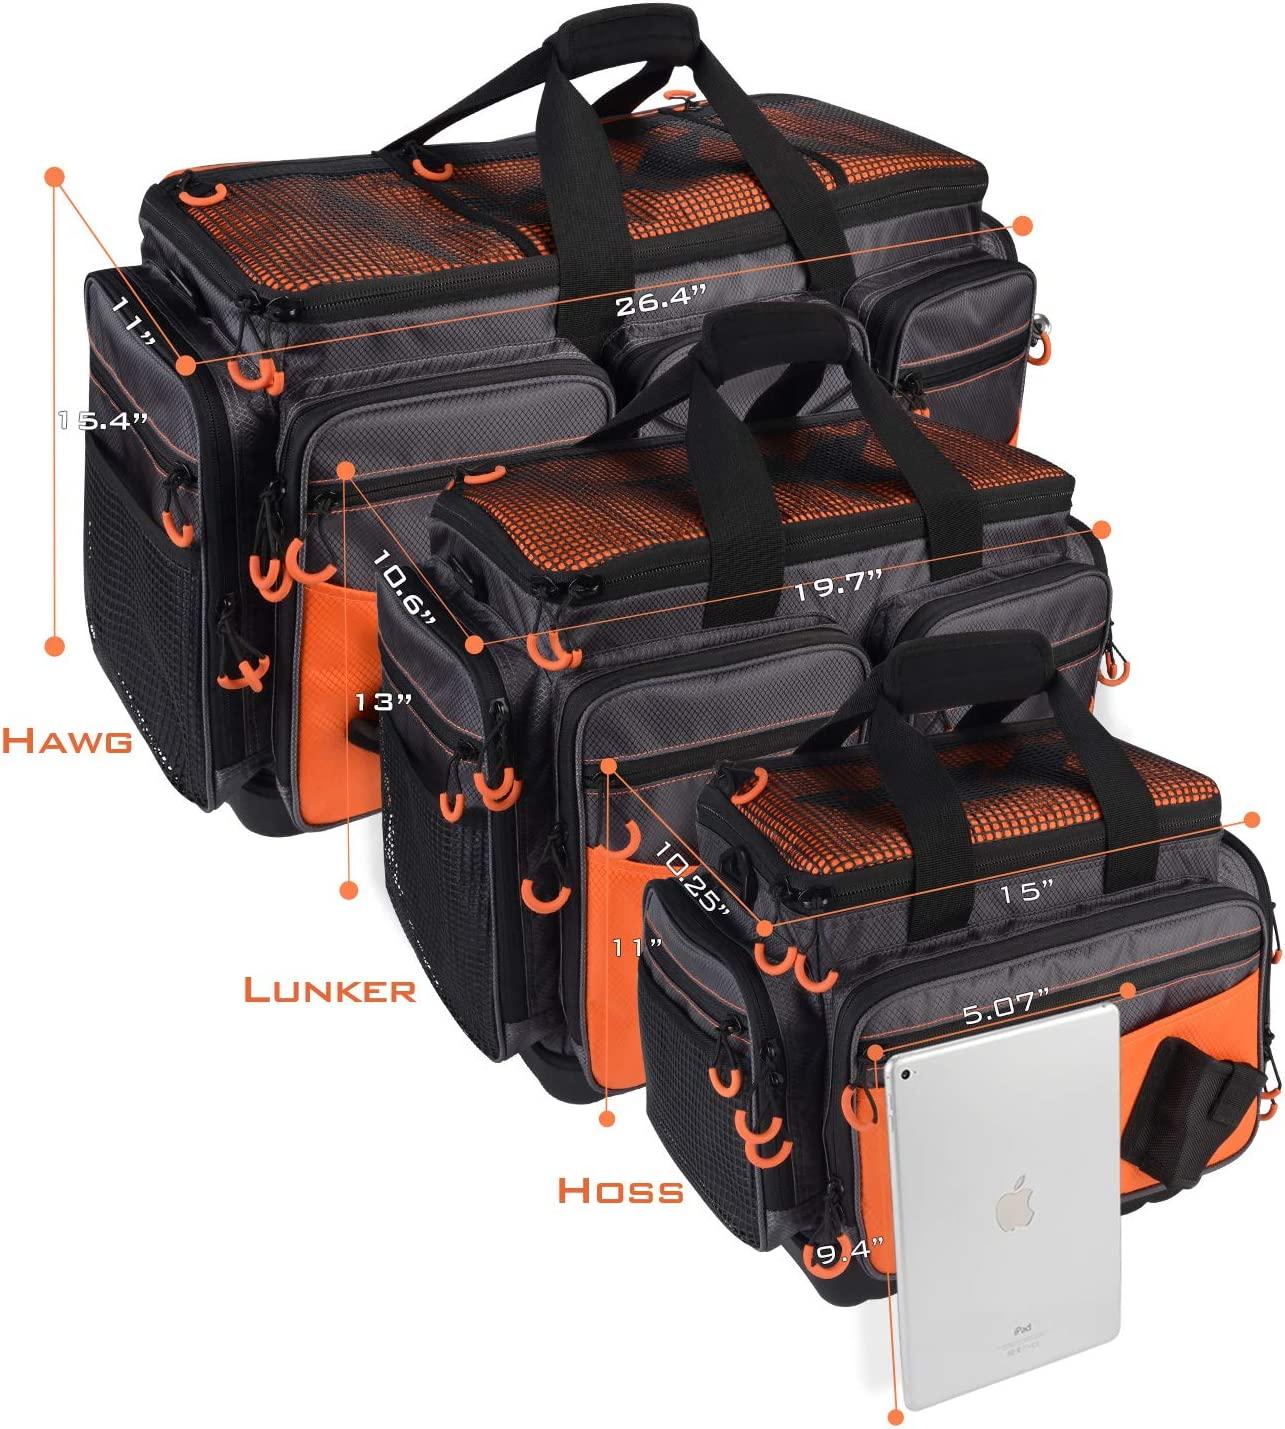  KastKing Fishing Gear & Tackle Bags - Saltwater Resistant Fishing  Bags - Fishing Tackle Storage Bags,Medium-Hoss(Without Trays,15x11x10.25  Inches),Orange : Sports & Outdoors